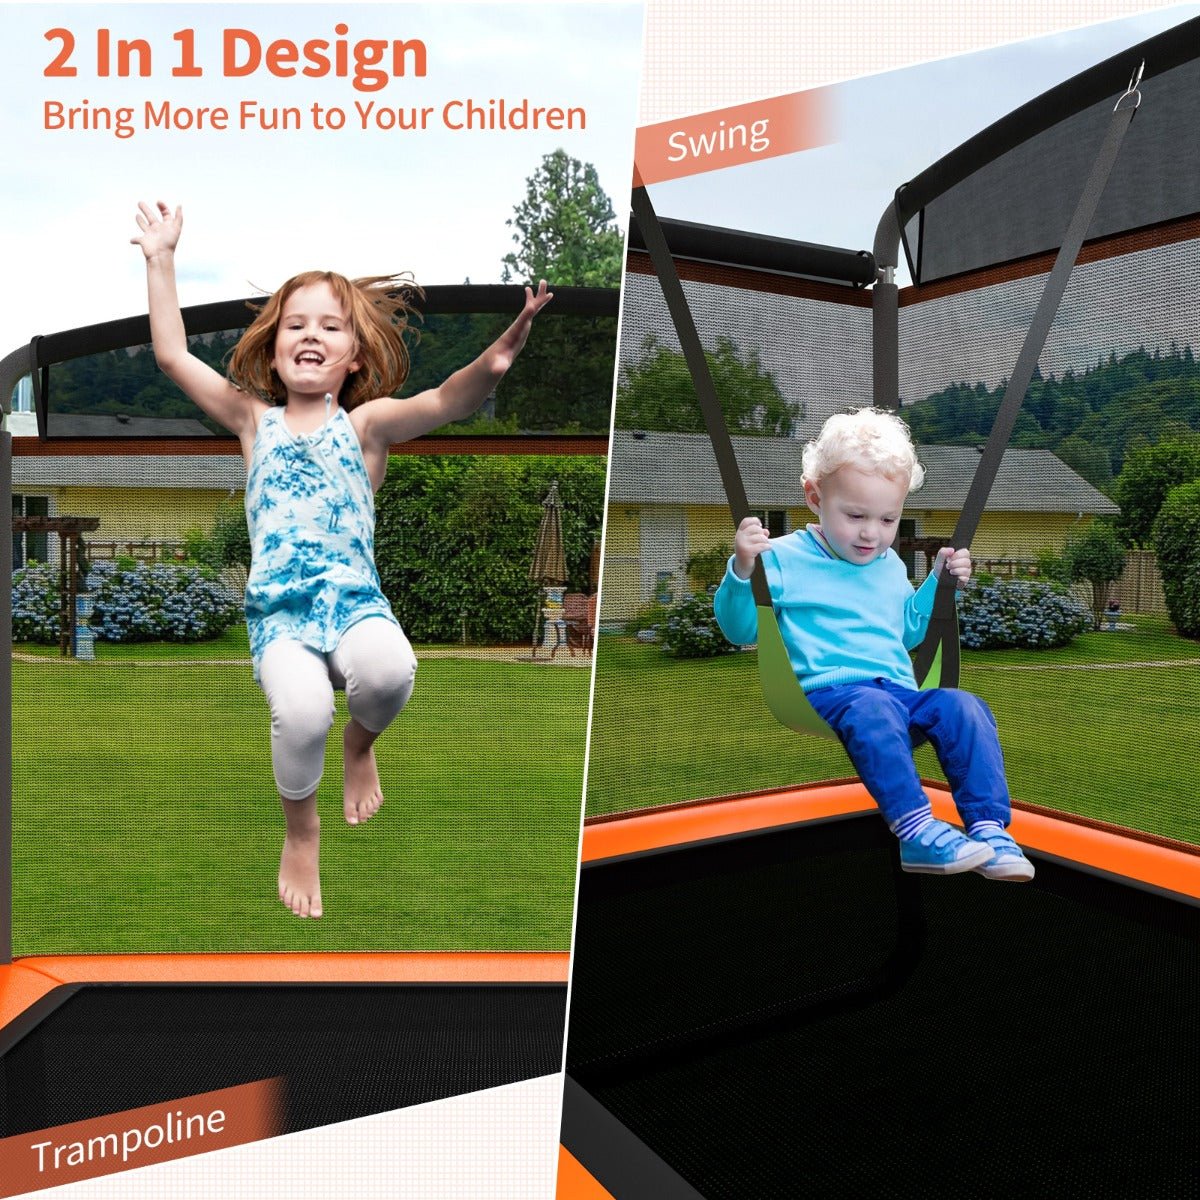 Swing and Bounce: 6 FT Recreational Trampoline with Swing for Children